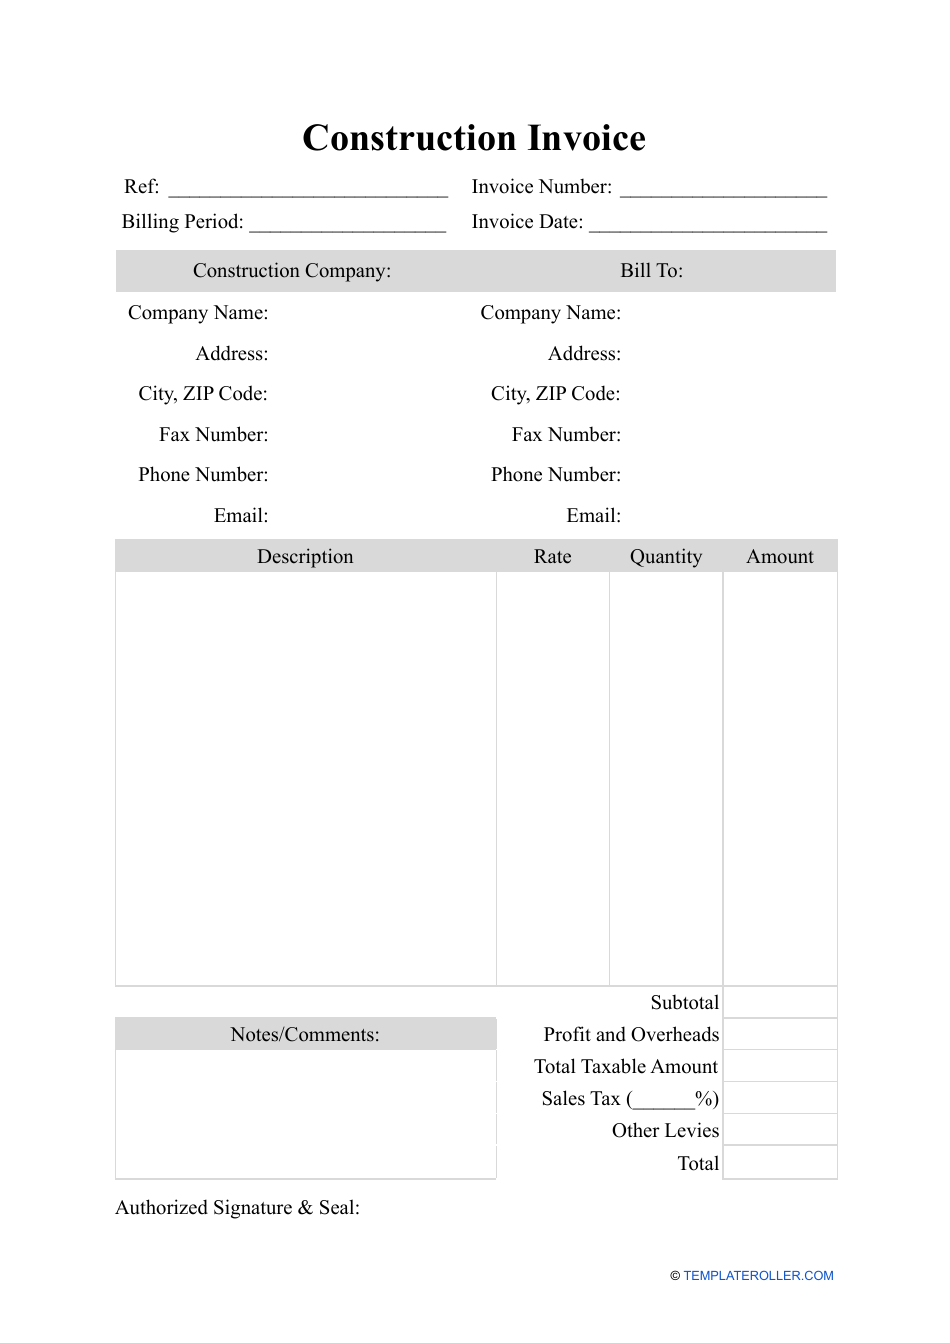 Construction Invoice Template, Page 1